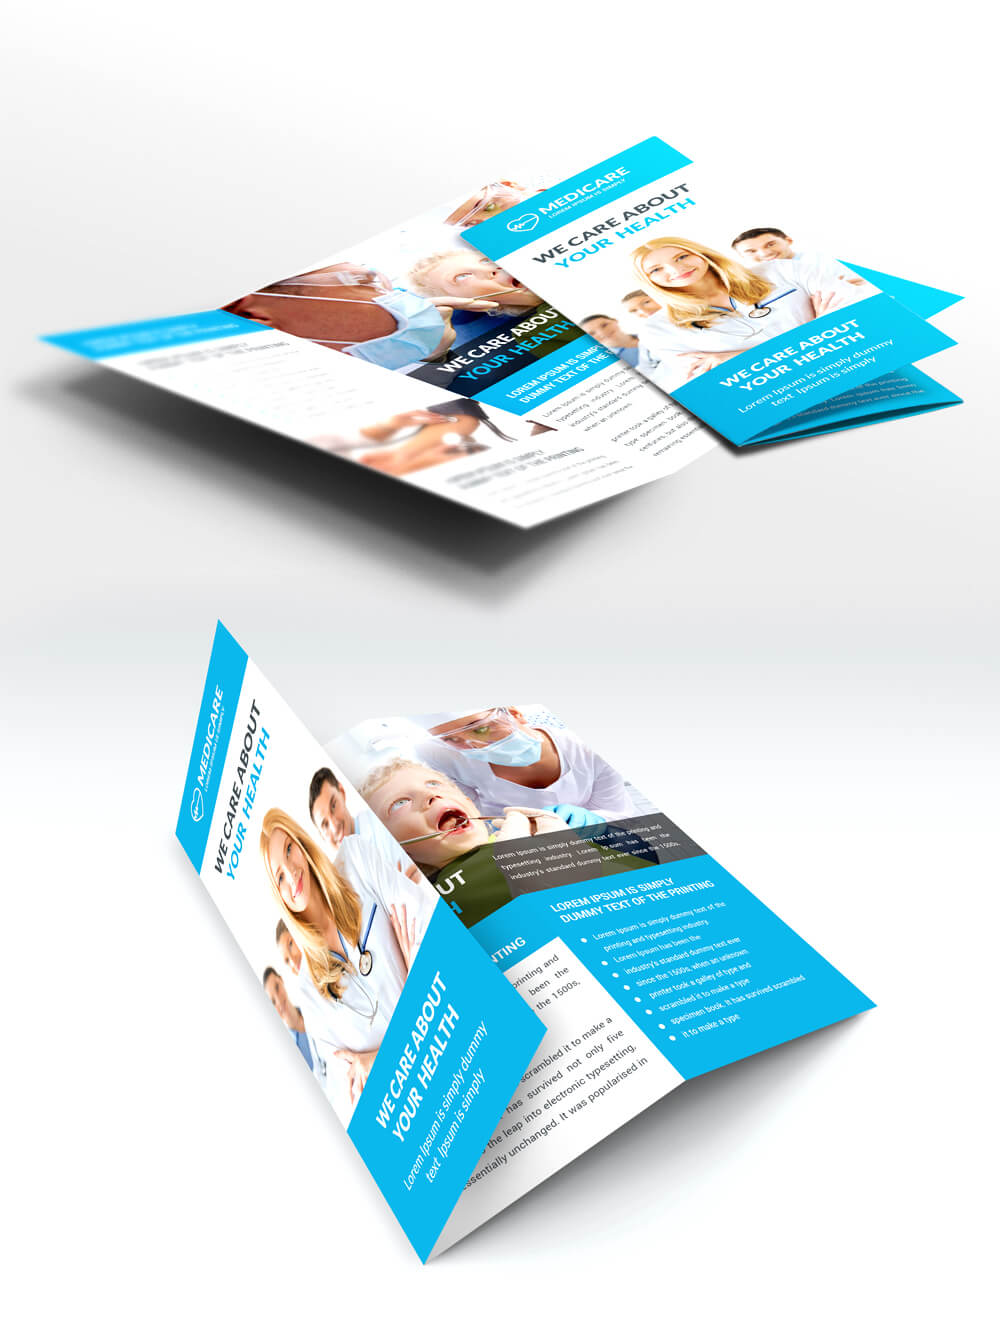 Medical Care And Hospital Trifold Brochure Template Free Psd Regarding 3 Fold Brochure Template Psd Free Download